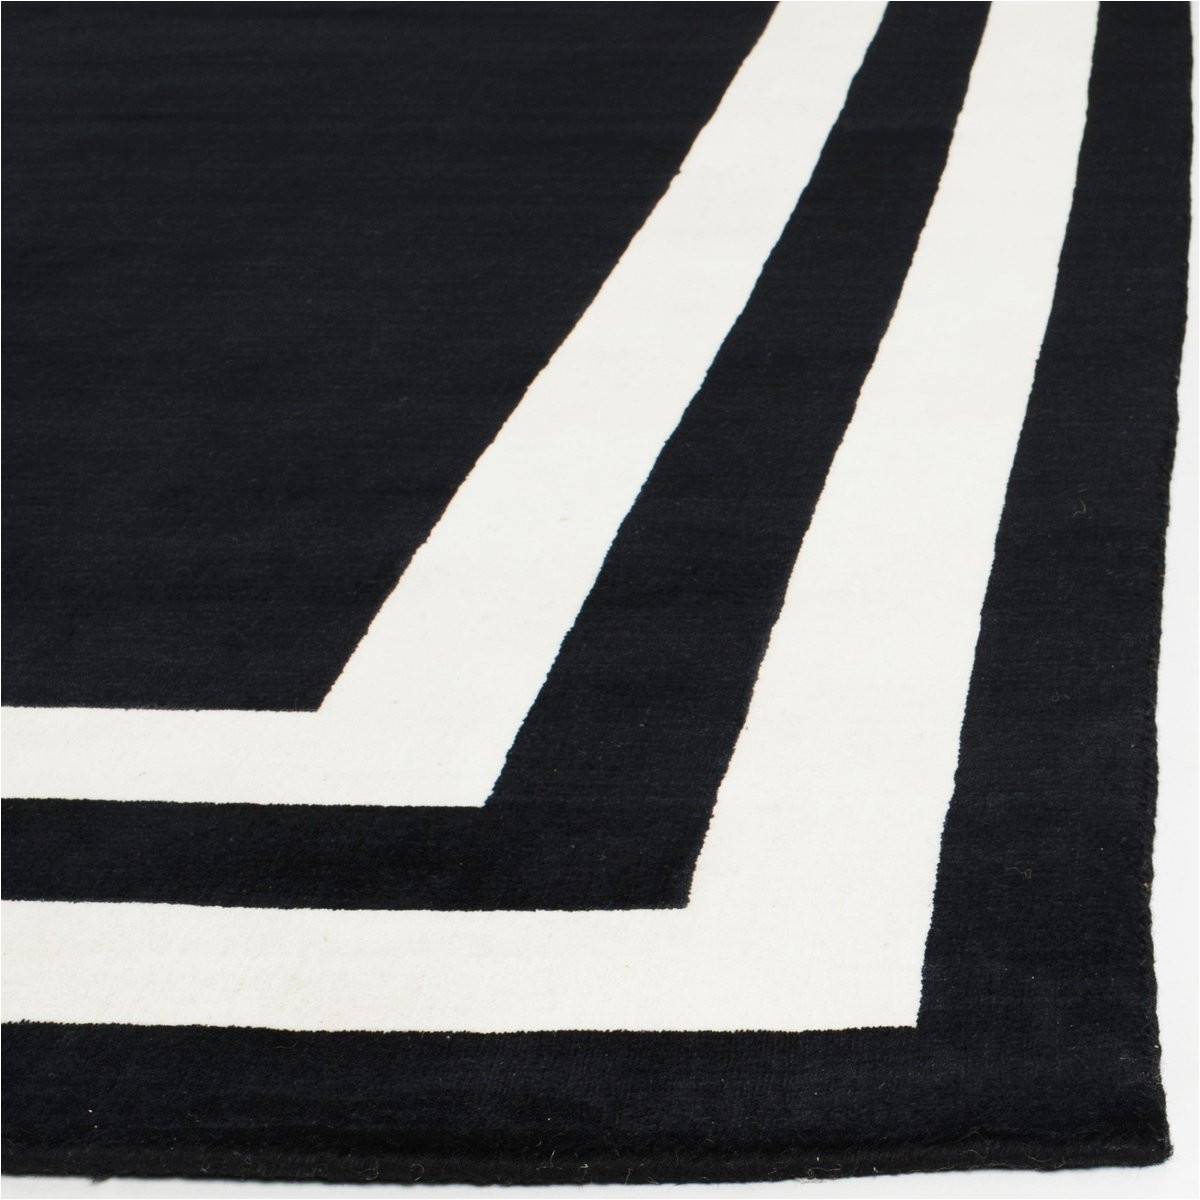 Black area Rug with White Border Ralph Lauren Fitzgerald Border Rlr-4151 Rugs Rugs Direct